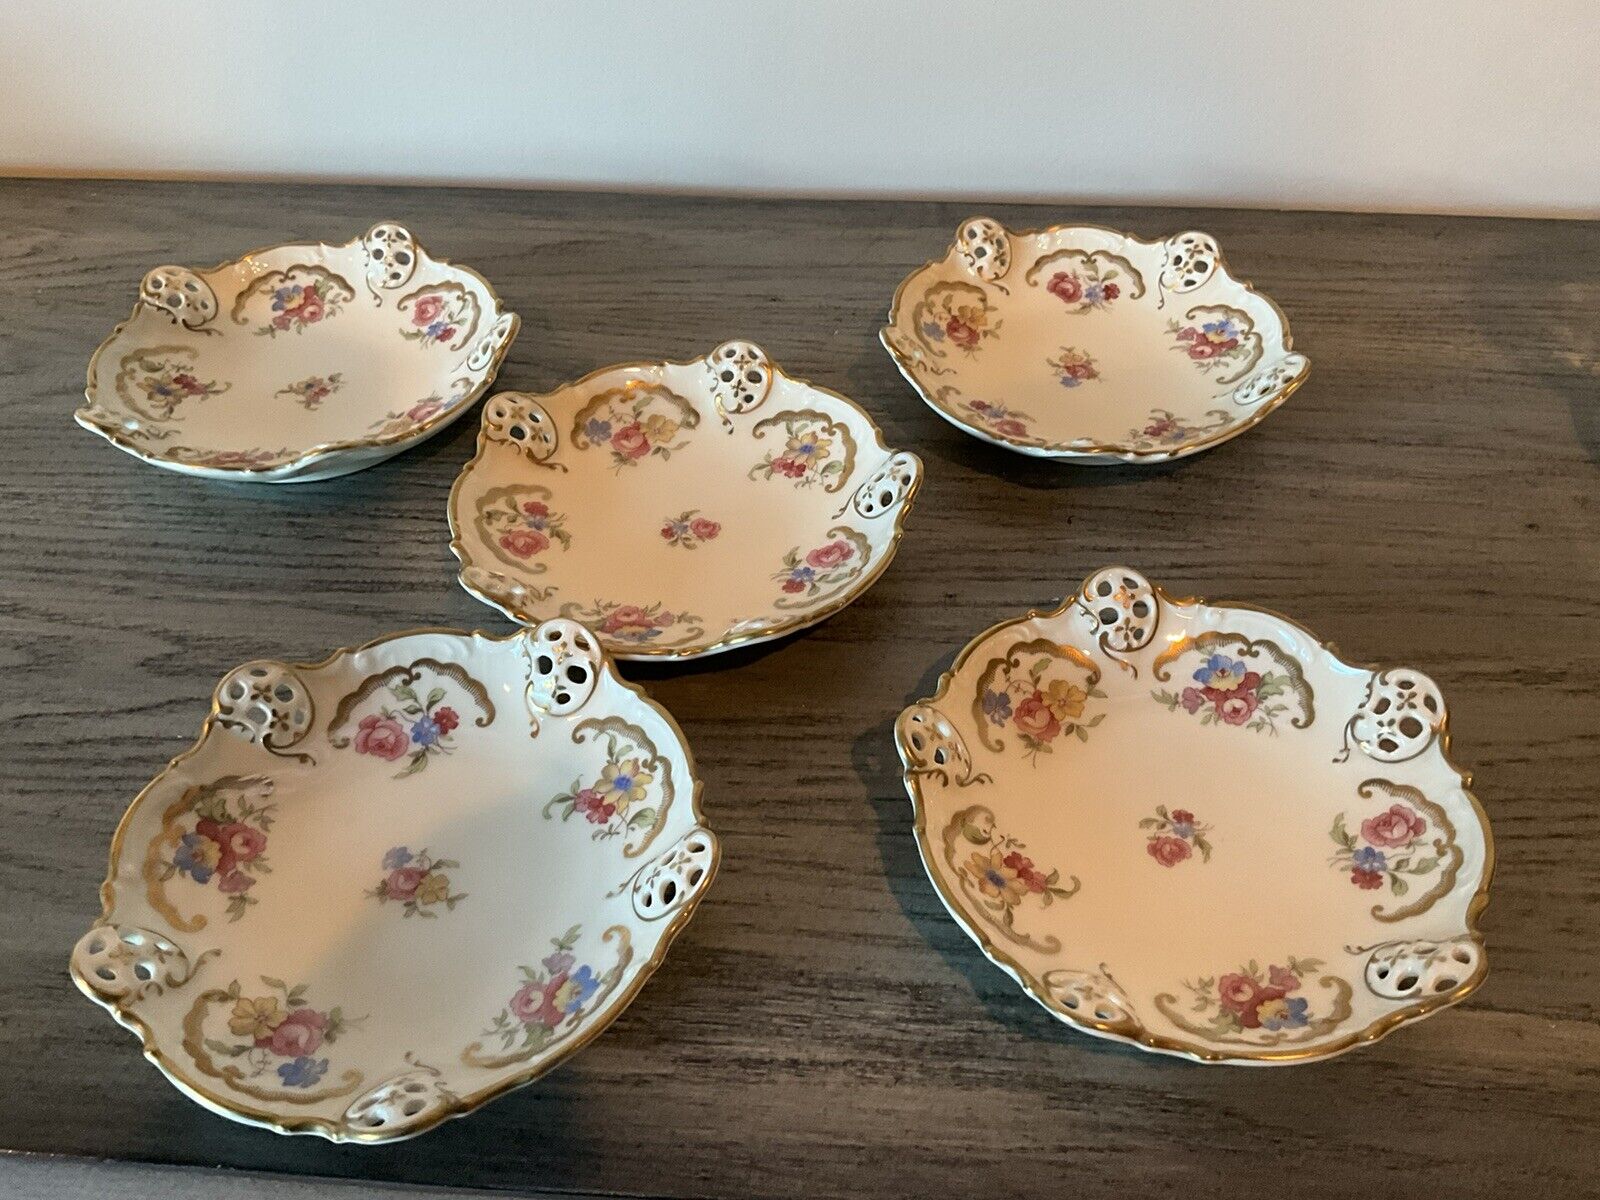 Antique Rosenthal Porcelain Set Of Small Decorative Dishes/plate 1901-1933